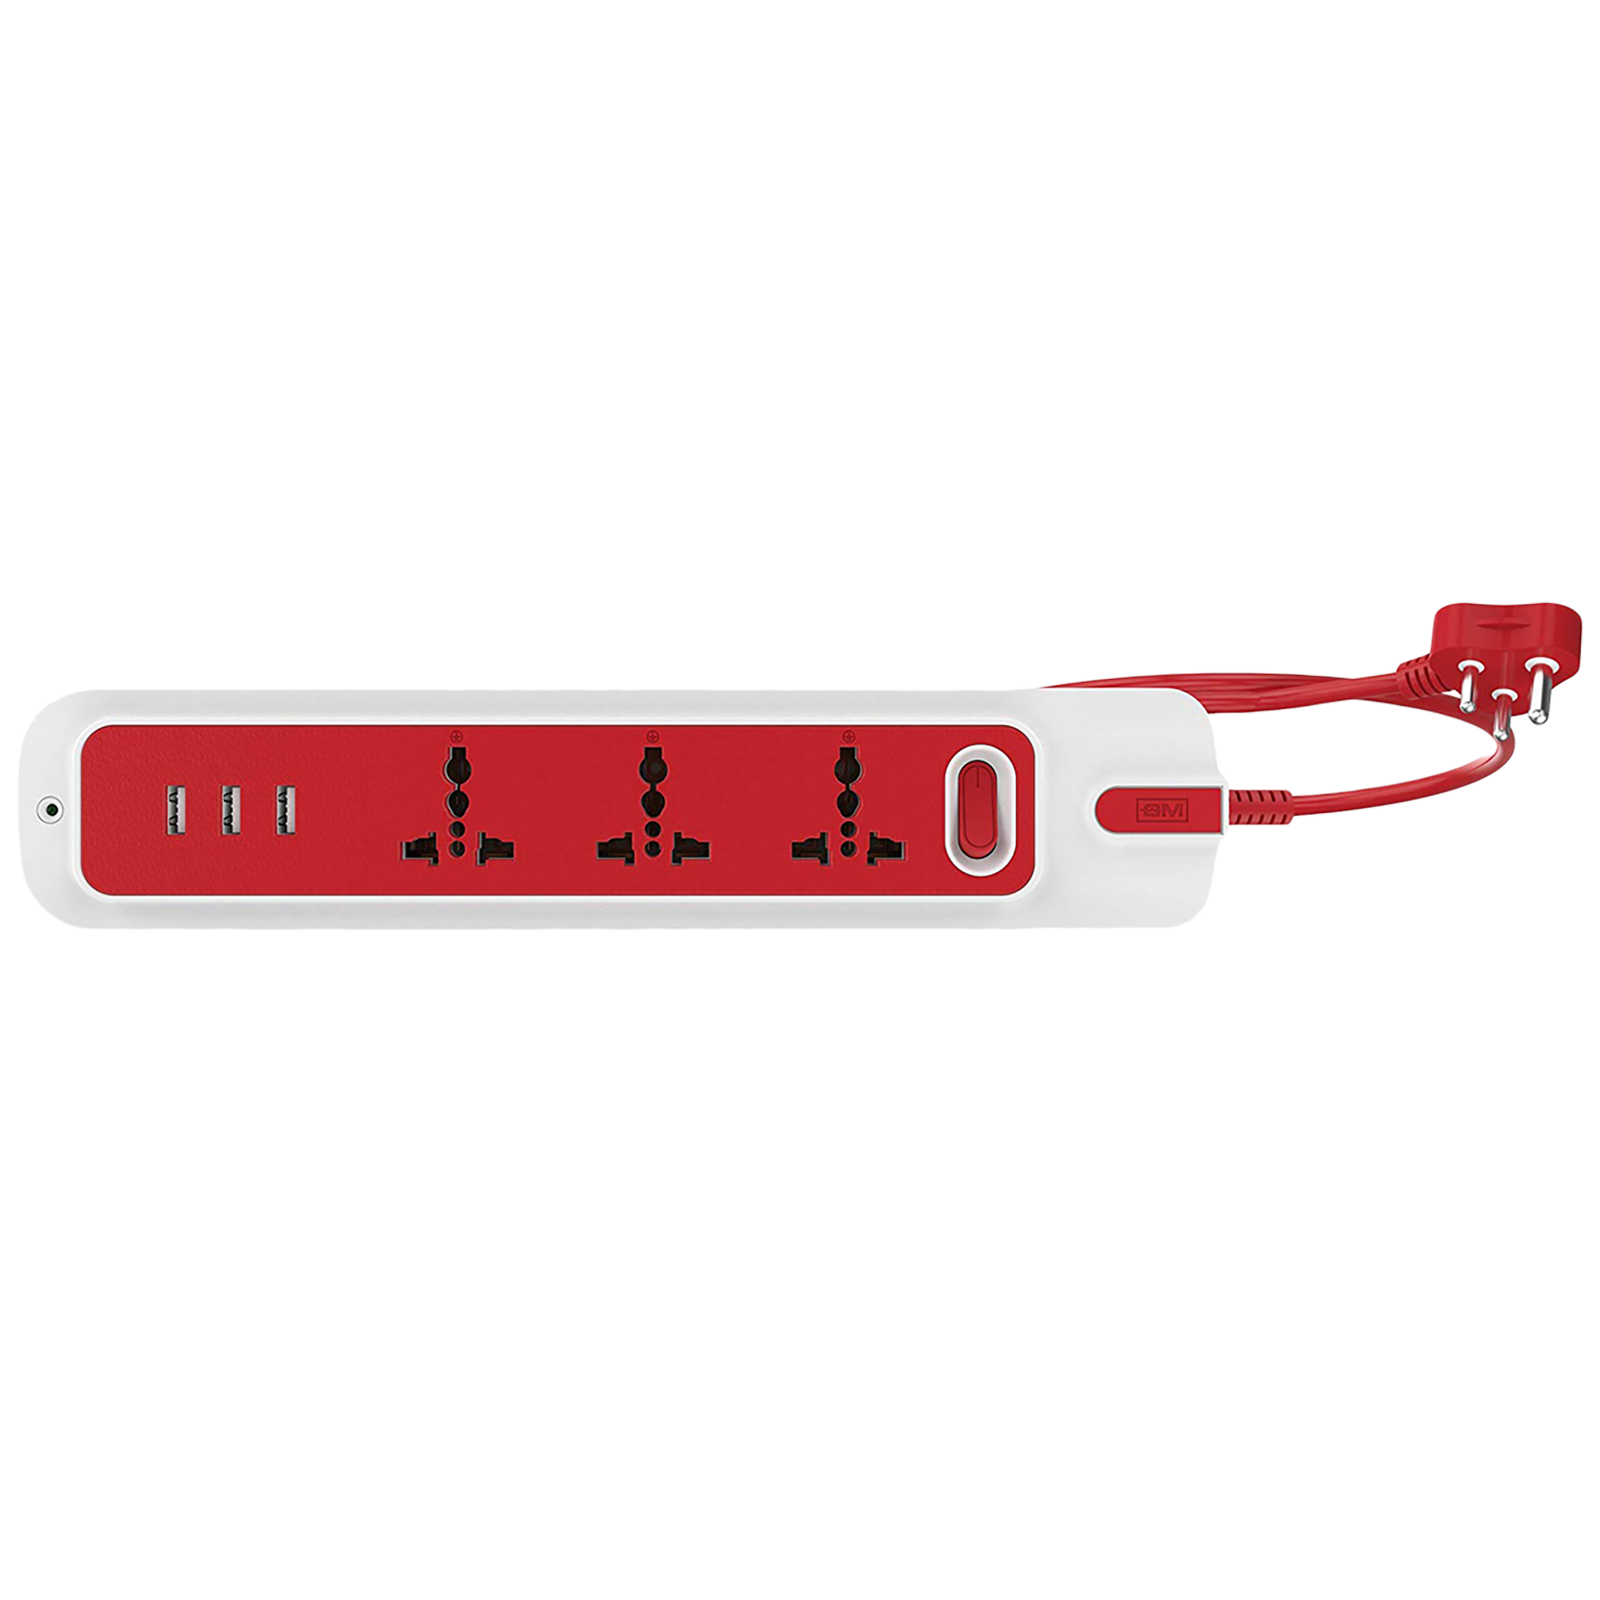 GM Lemoid 10 Amps 3 Sockets Surge Protector (2.1 Meters, 3260, White/Red)